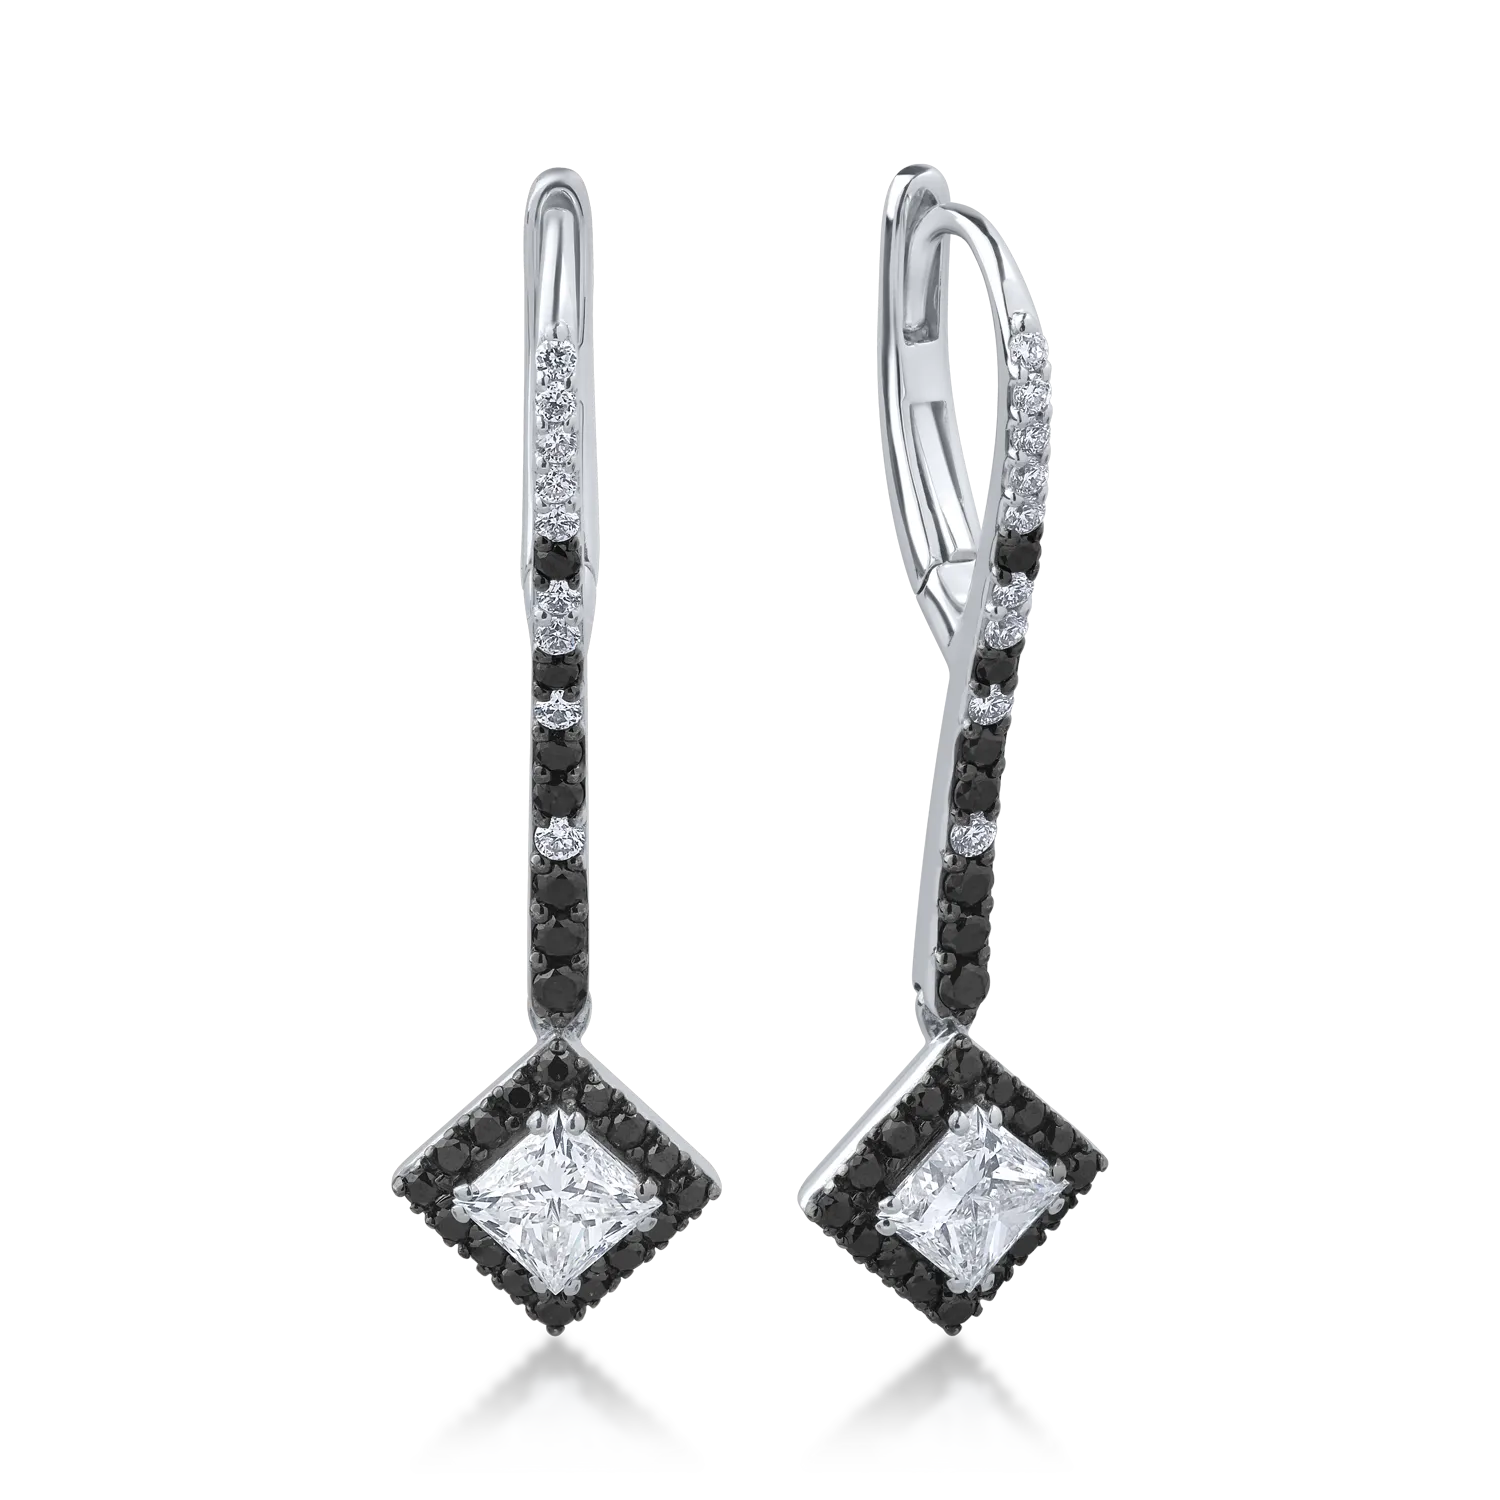 18K white gold earrings with 1.23ct clear diamonds and 0.48ct black diamonds